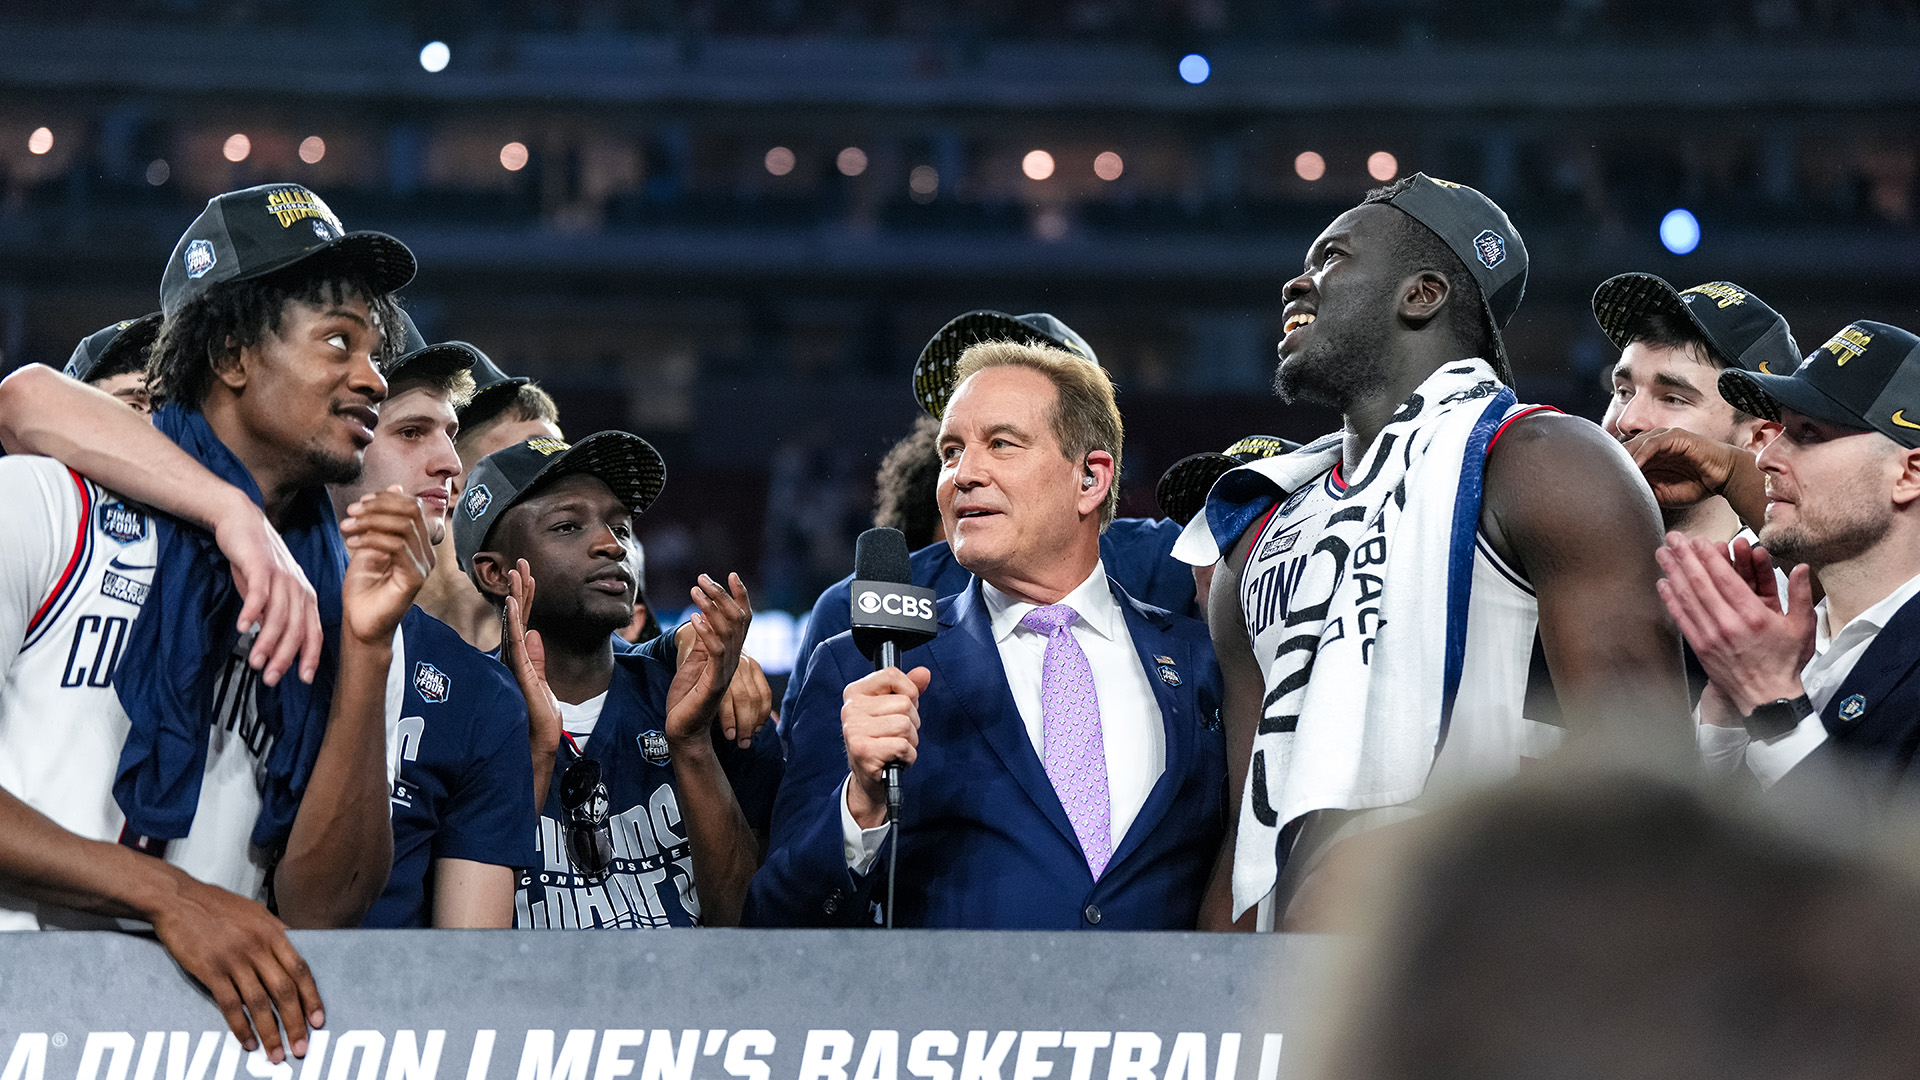 CBS Sports’ Jim Nantz interviews the UConn men's basketball team and 2023 champions during the Final Four.